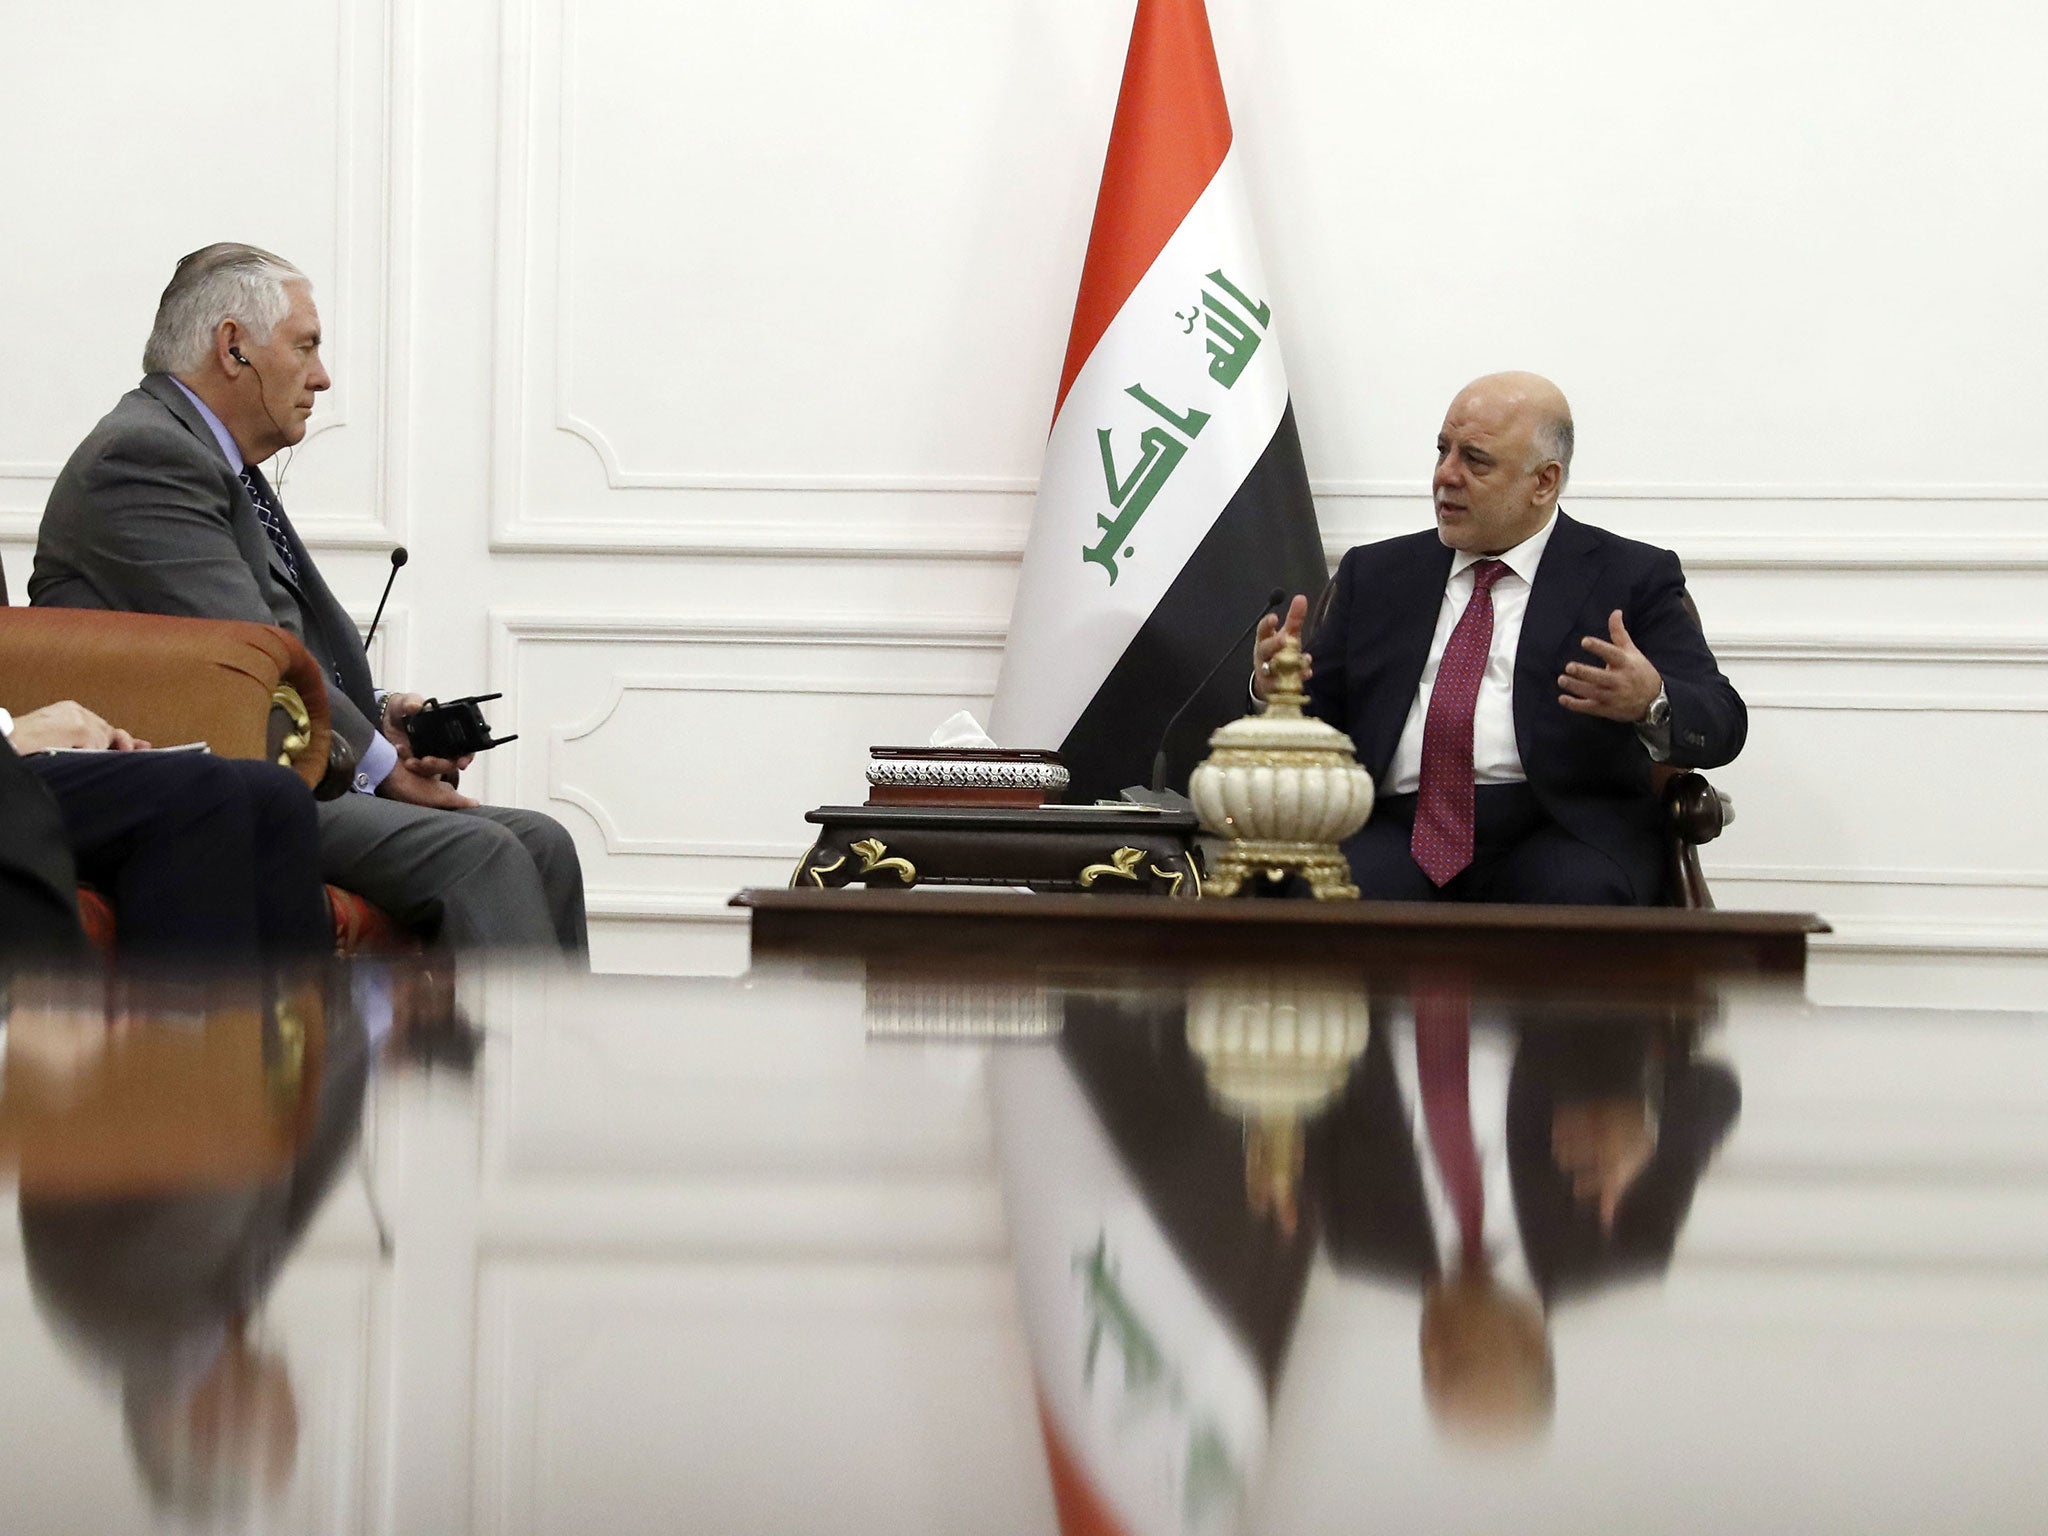 The Iraqi Prime Minister Haider al-Abadi (right), pictured here during a meeting with the US's Rex Tillerson, has emerged with his reputation buoyed after successes over Isis and the Kurds